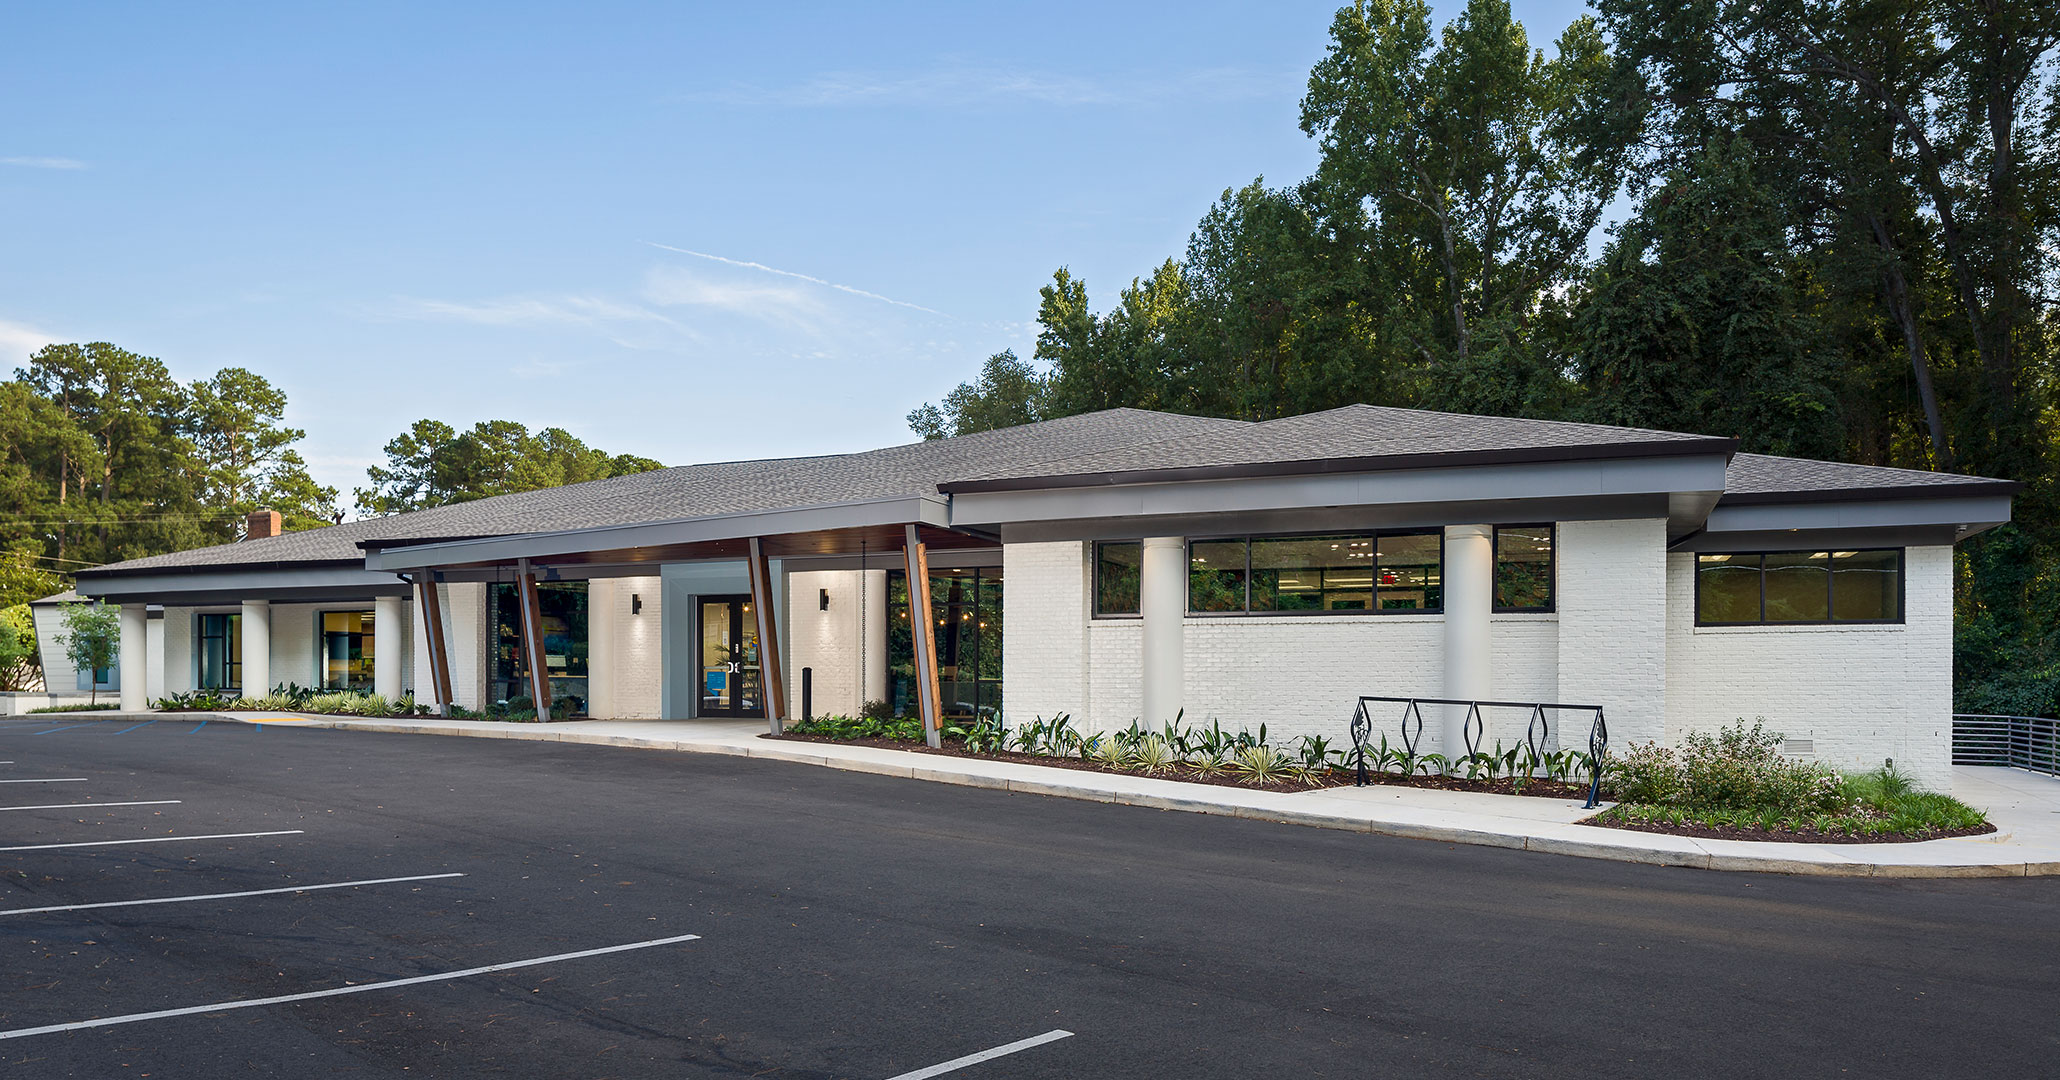 Richland County Library hired Boudreaux architects to design engaging outdoor spaces at the Cooper Library location.